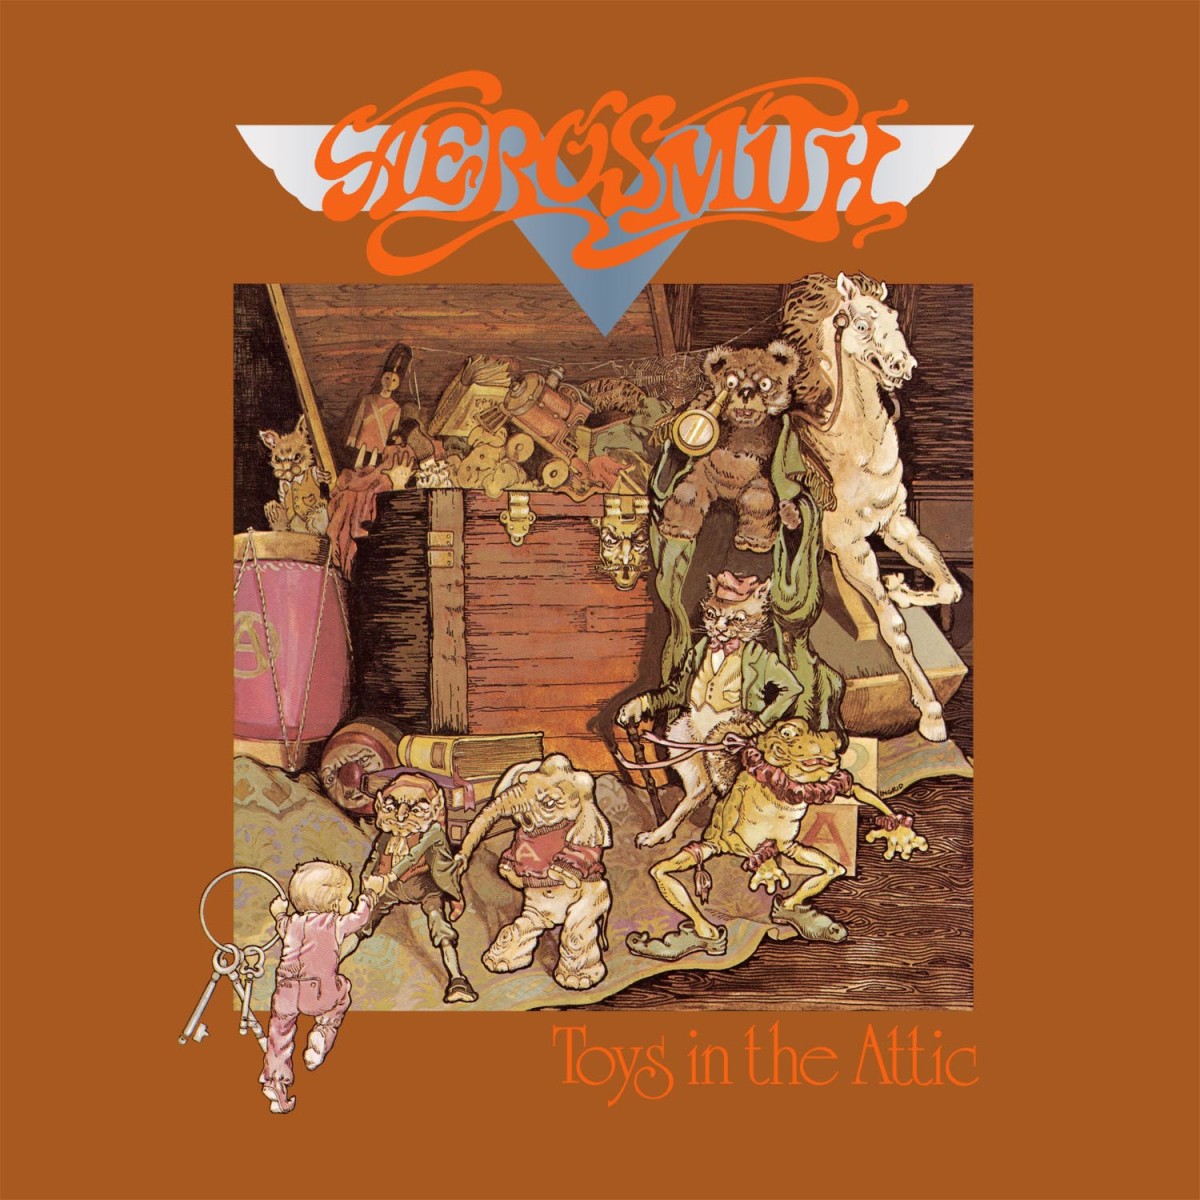 April 8, 1975: Toys in the Attic by Aerosmith was released